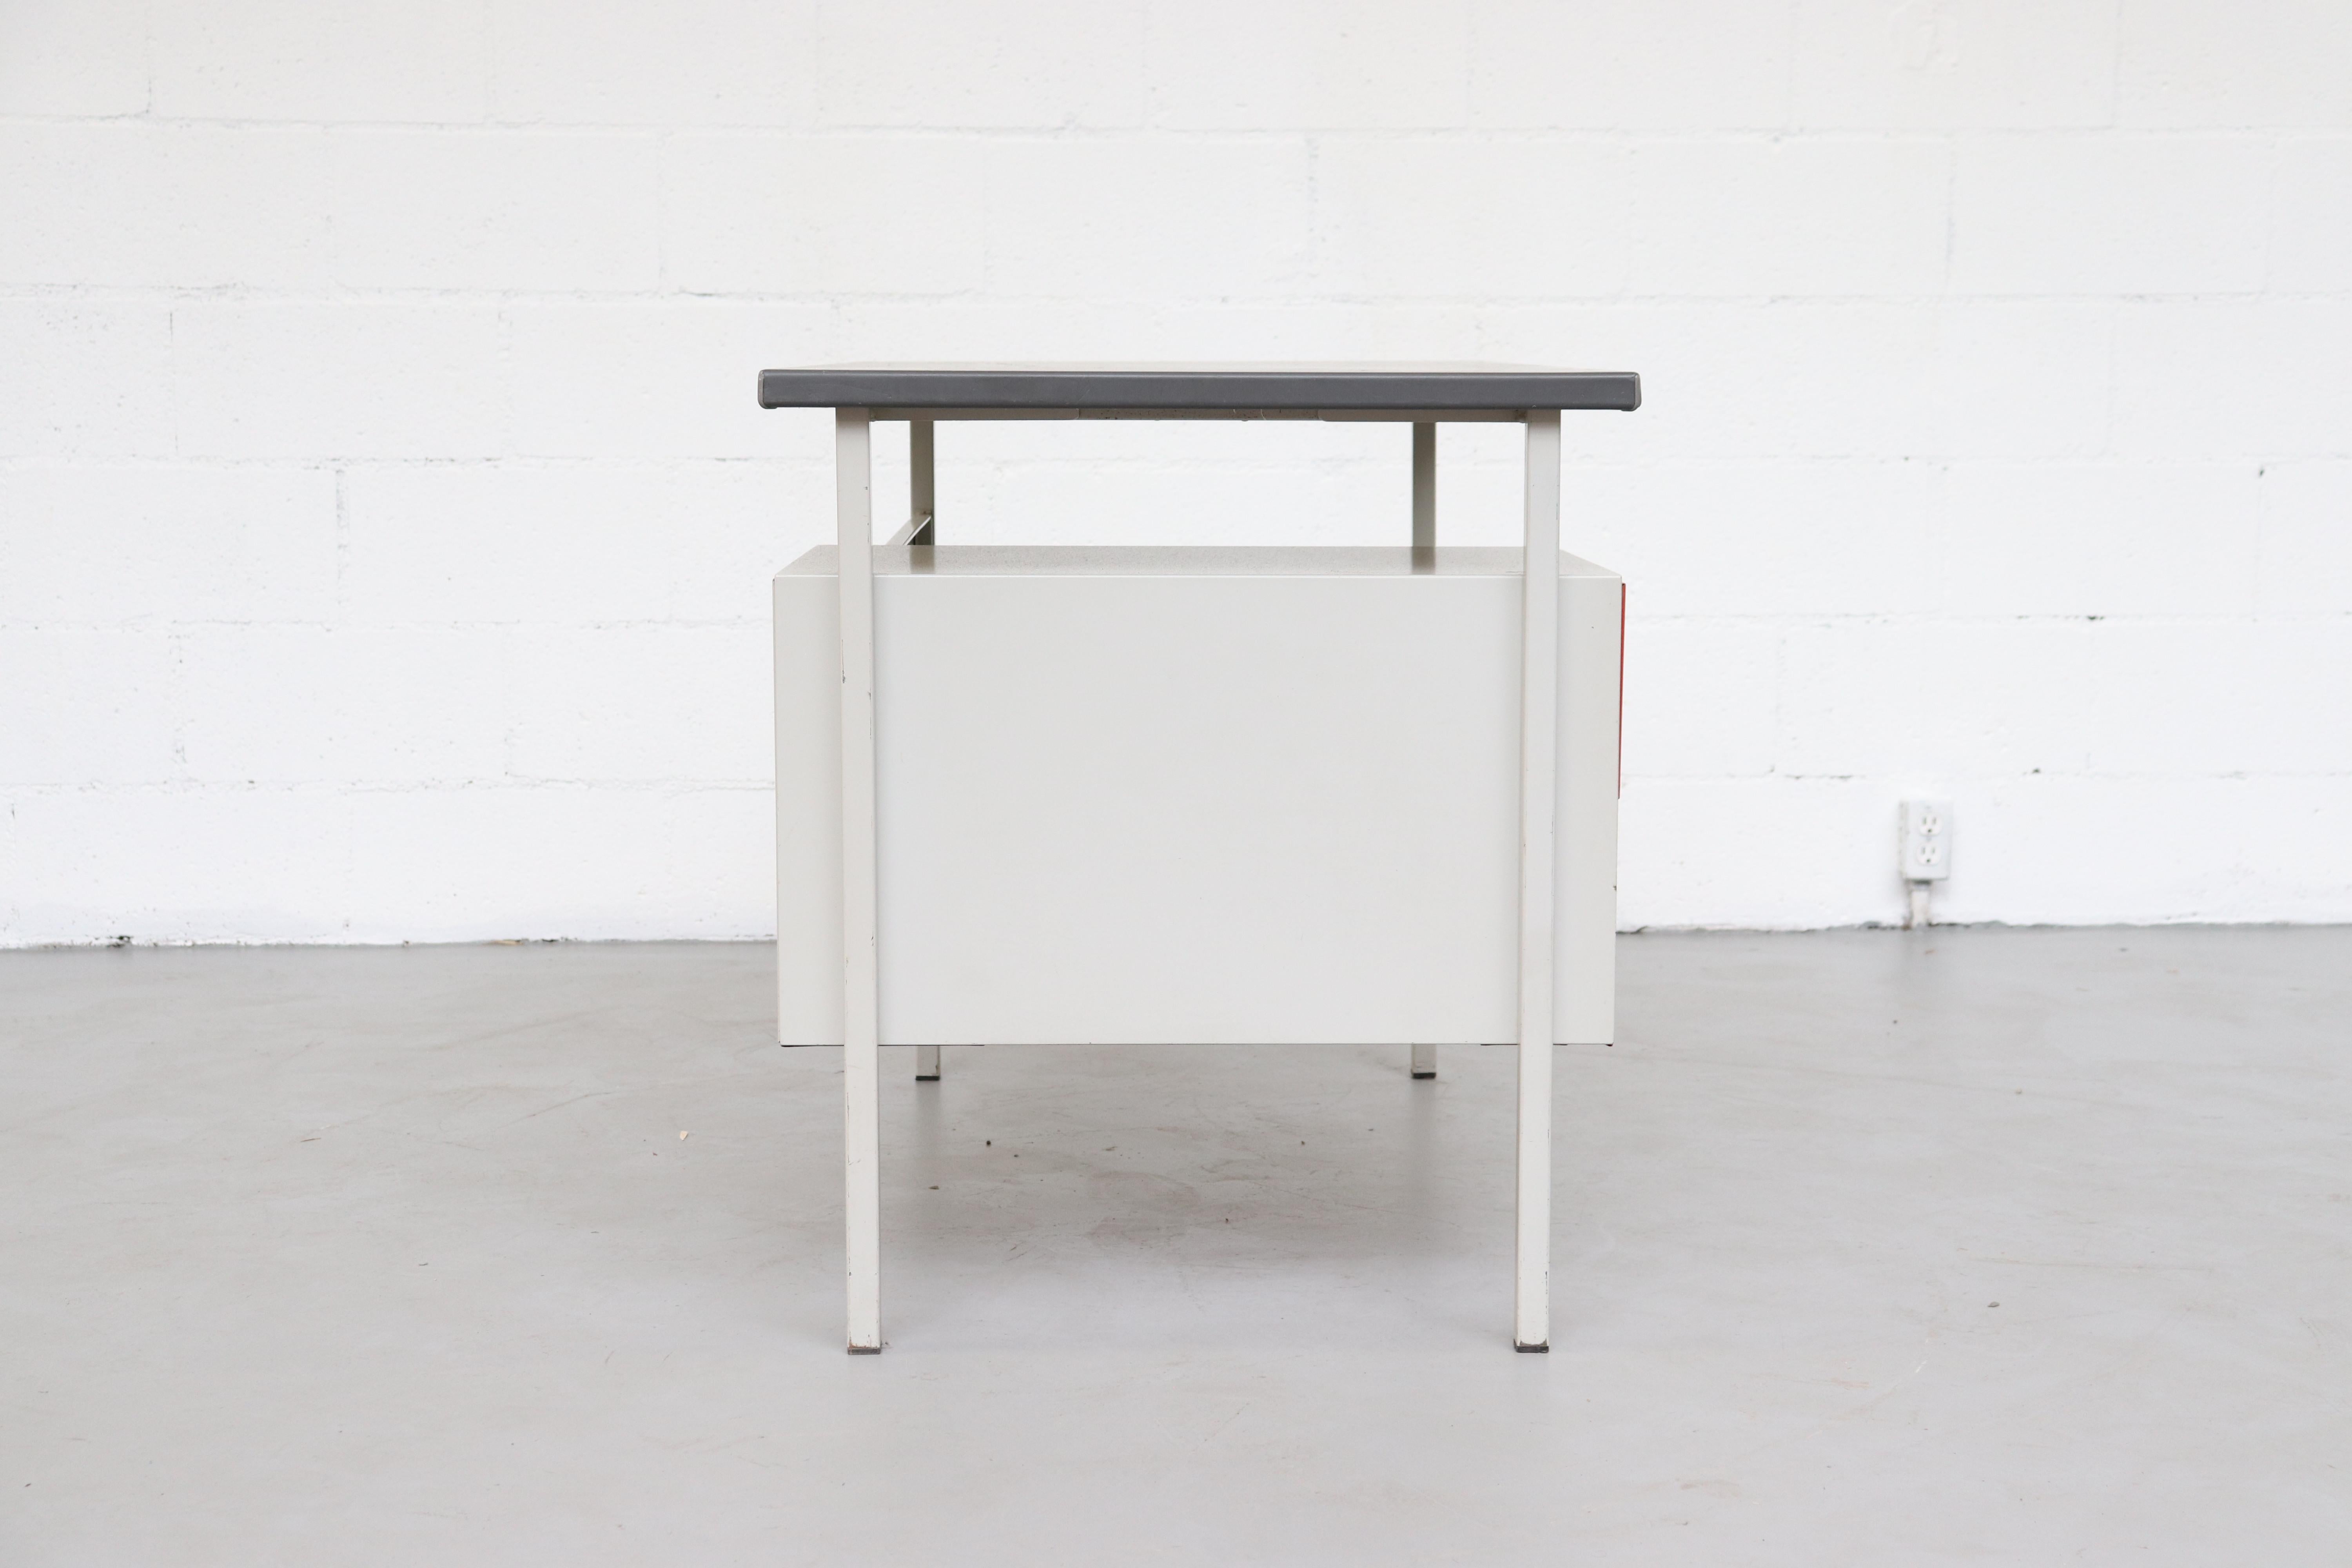 Dutch Gispen 3803 Industrial Desk with Privacy Screen